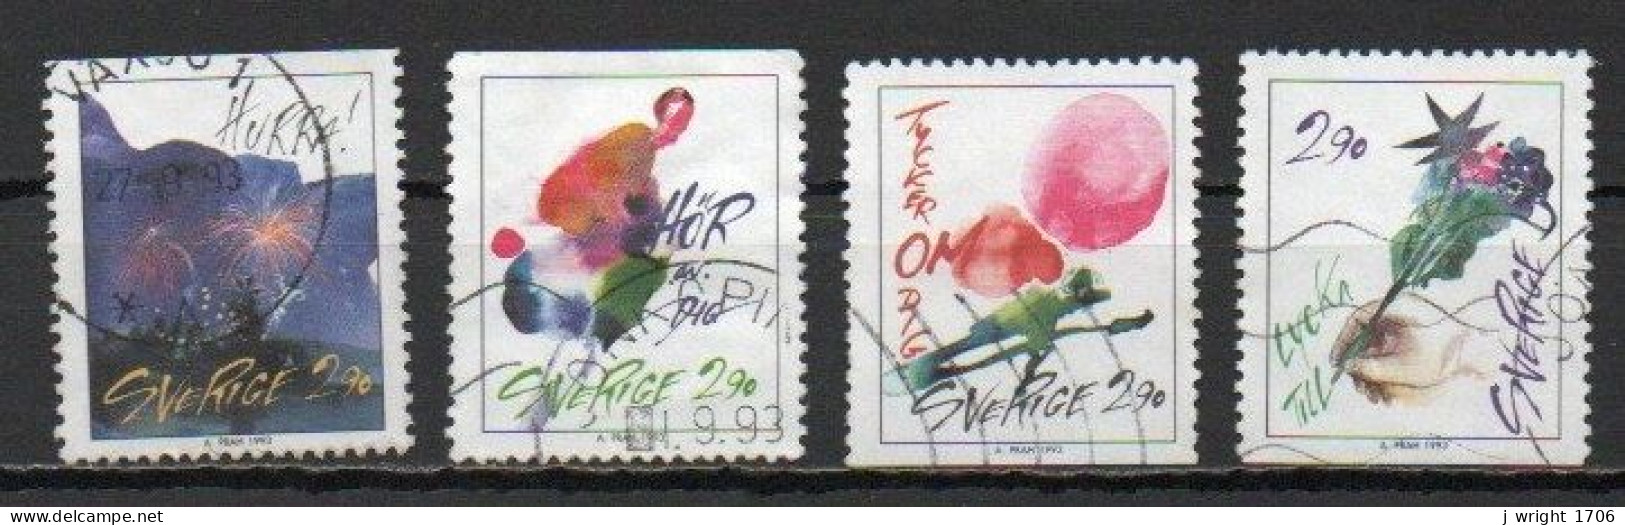 Sweden, 1993, Greetings Stamps, Set, USED - Gebraucht